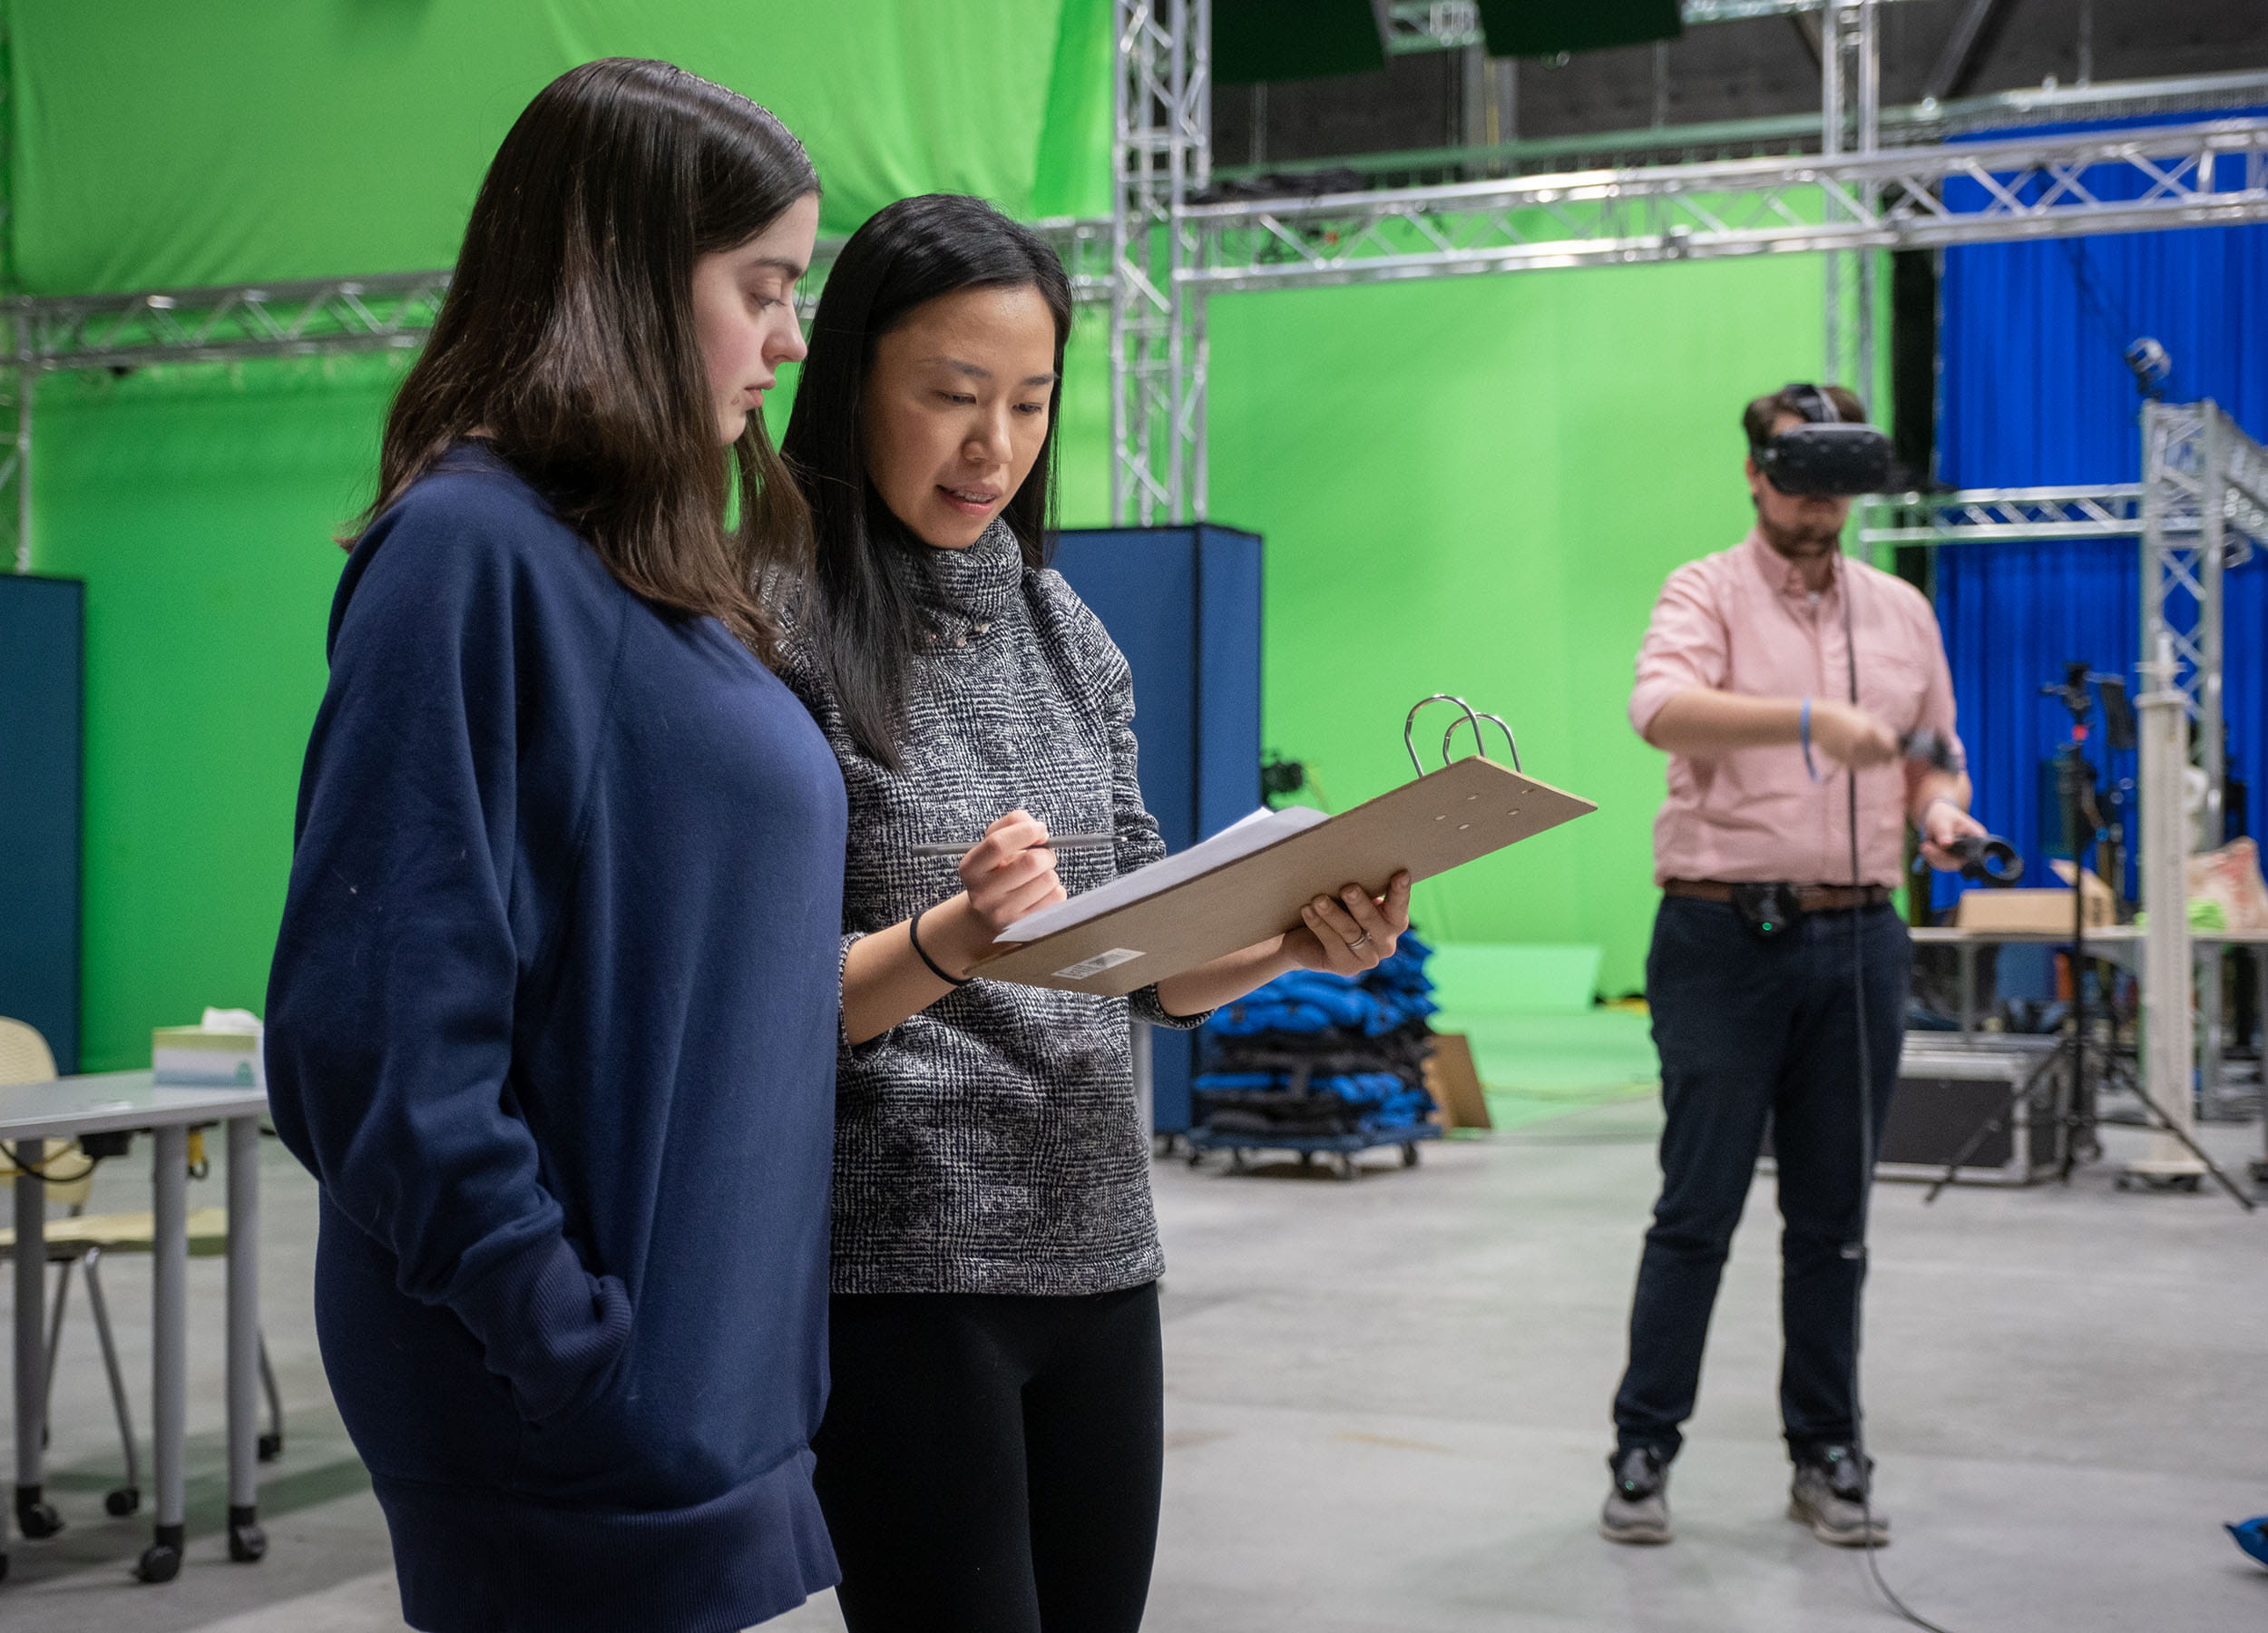 Two female students looking at a clipboard while a male student uses a VR headset